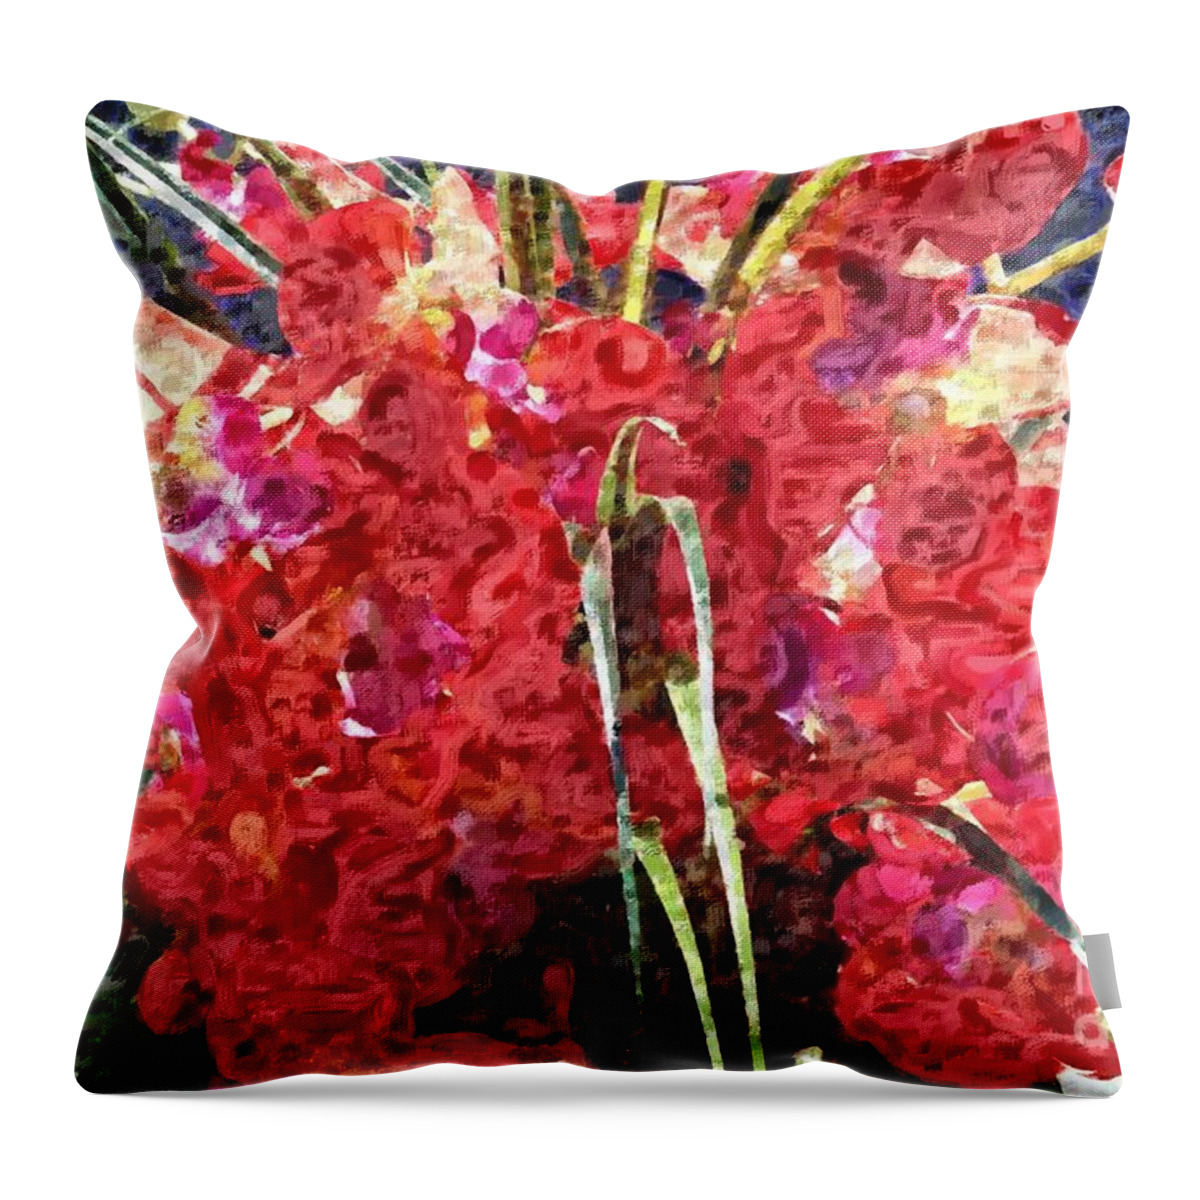 Orchids Throw Pillow featuring the photograph Bright Orchids by Katherine Erickson